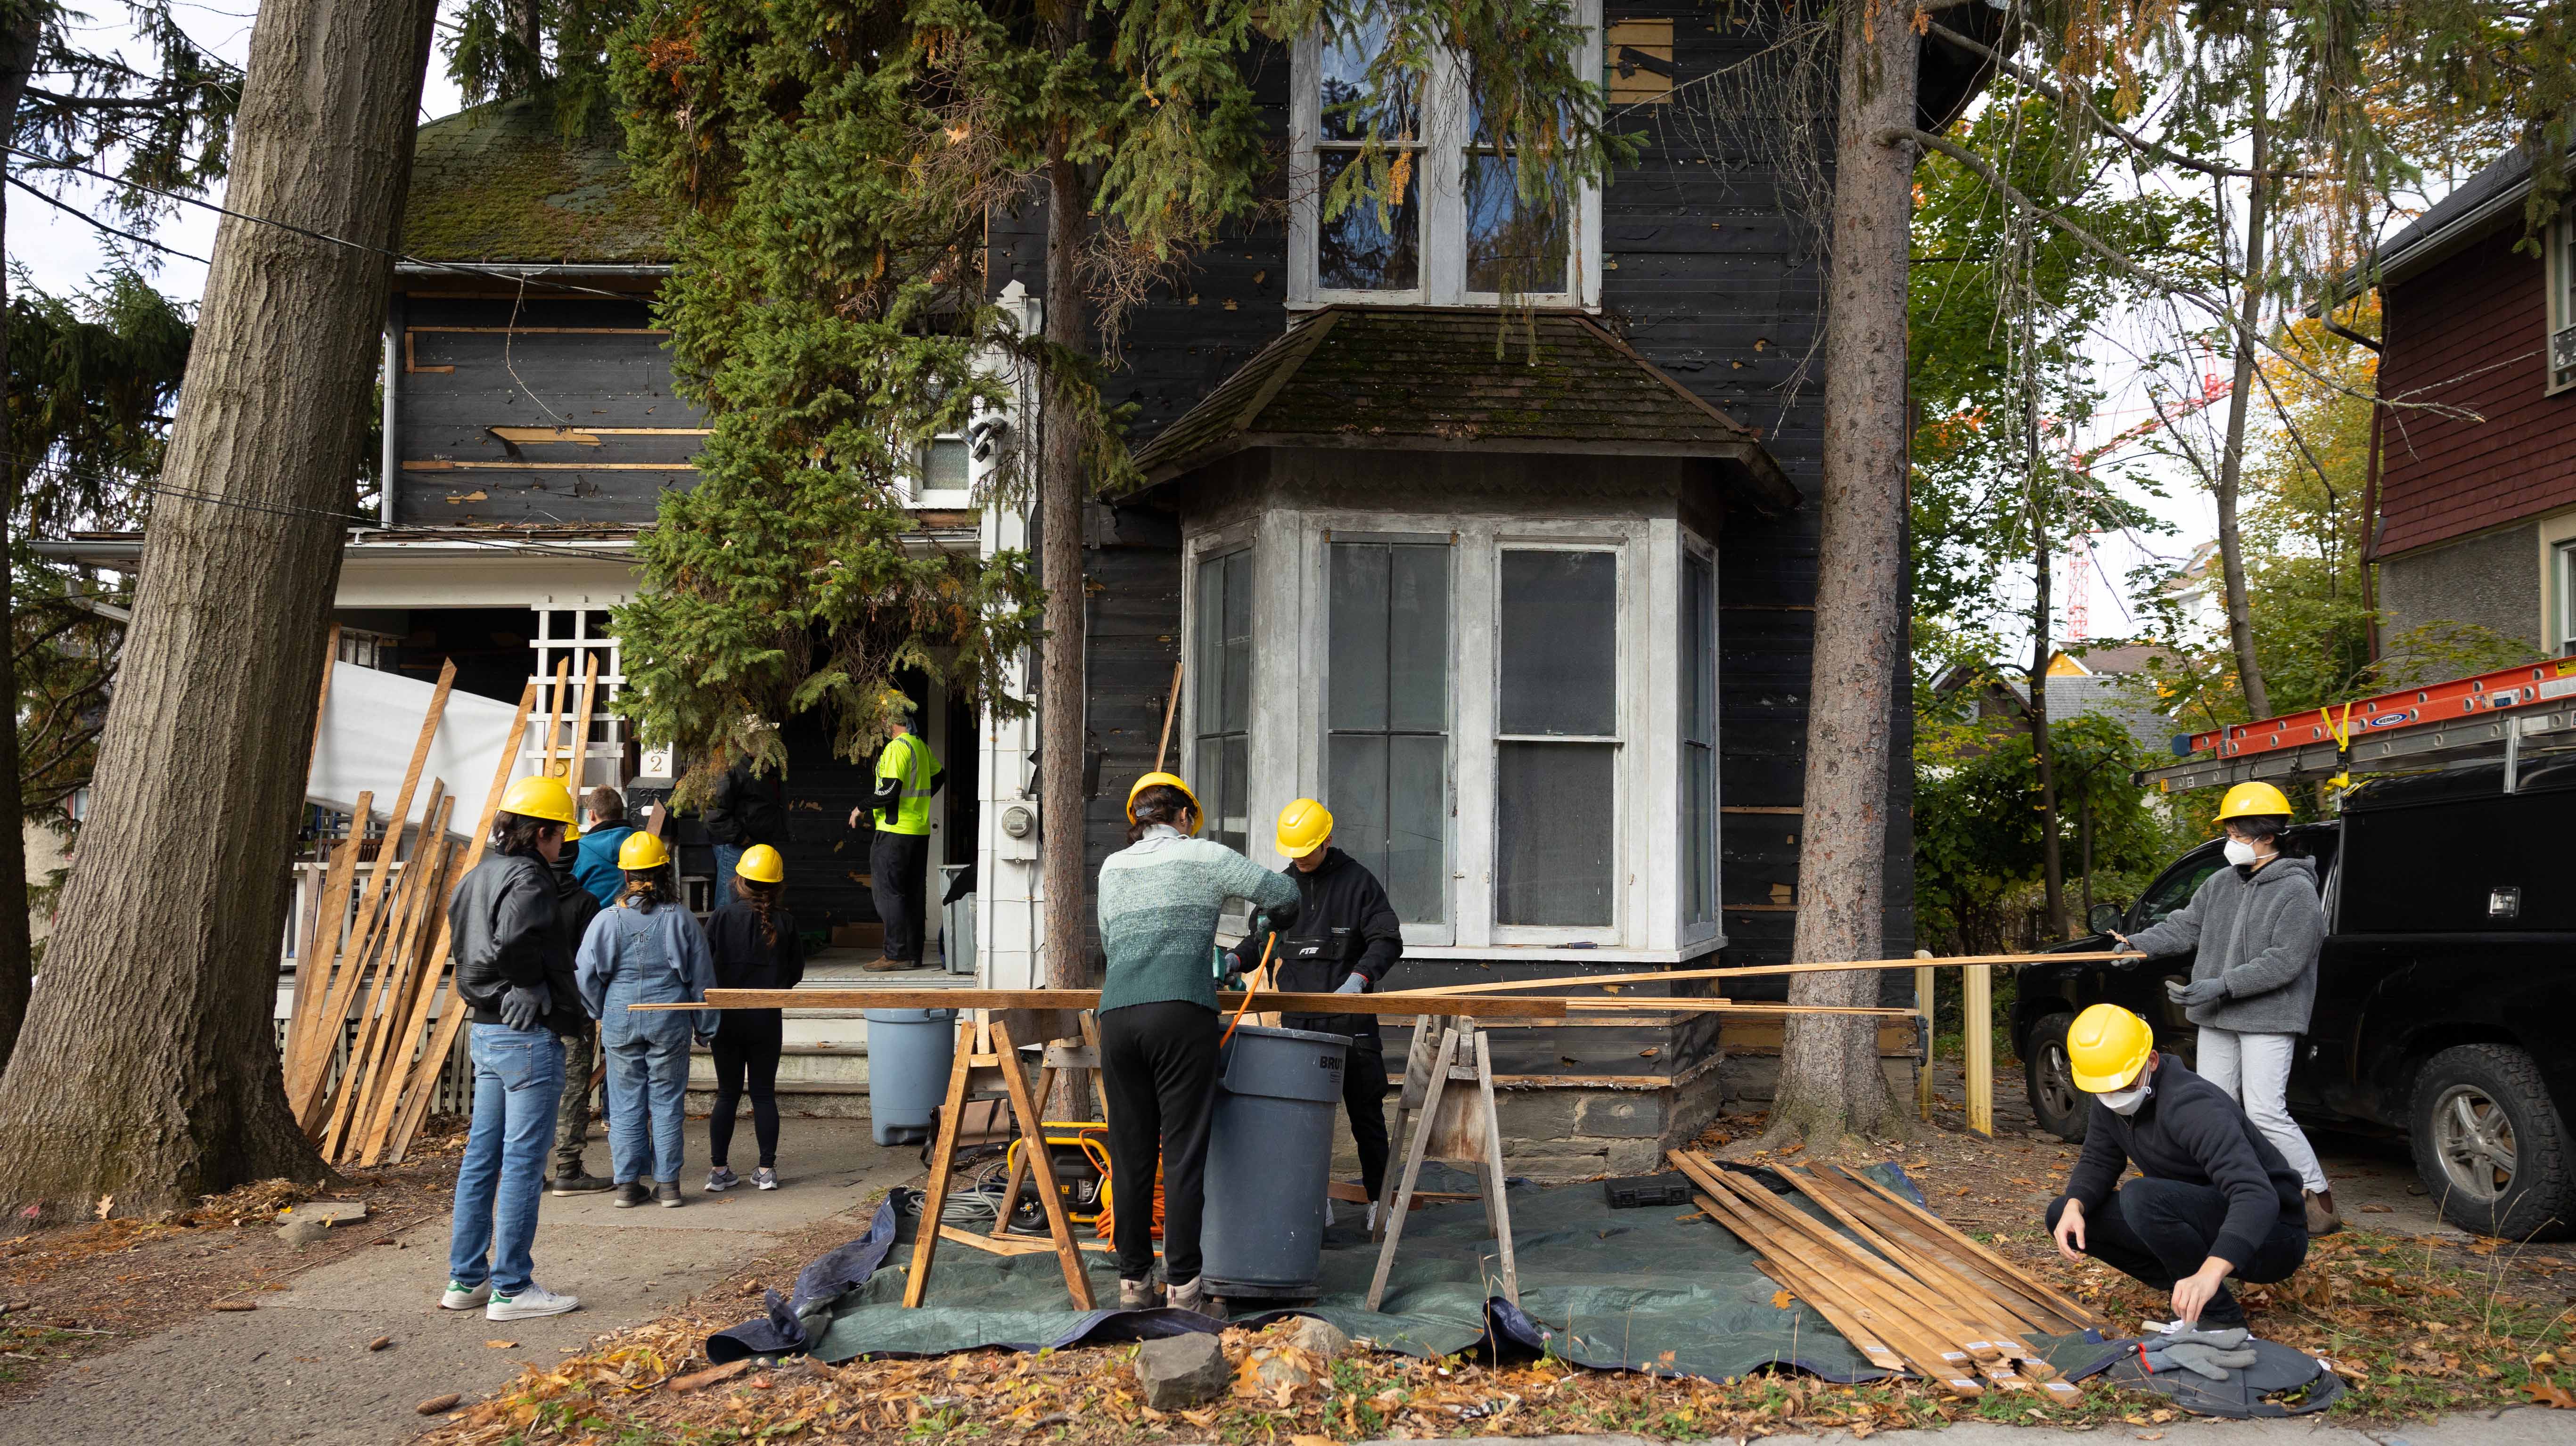 Construction workers wearing hard hats are renovating the exterior of a two-story house.